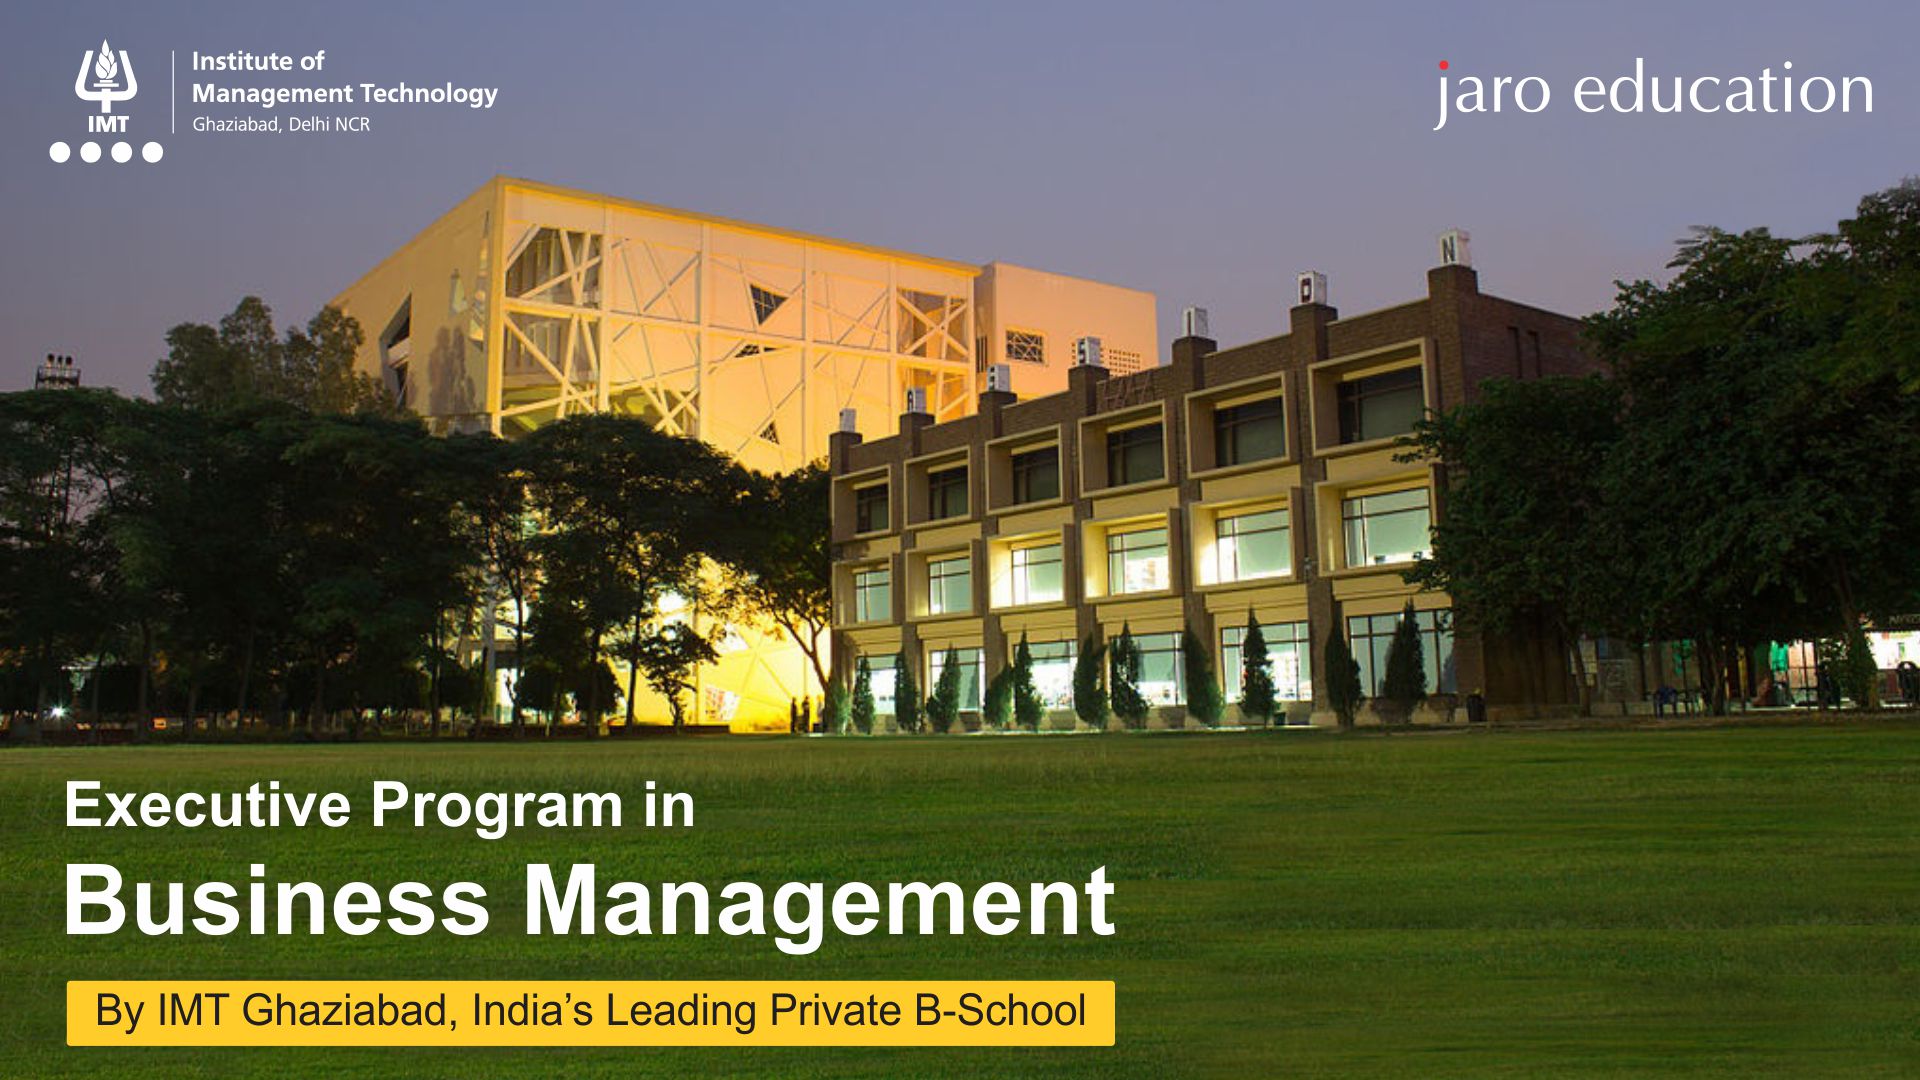 Executive Program in Business Management